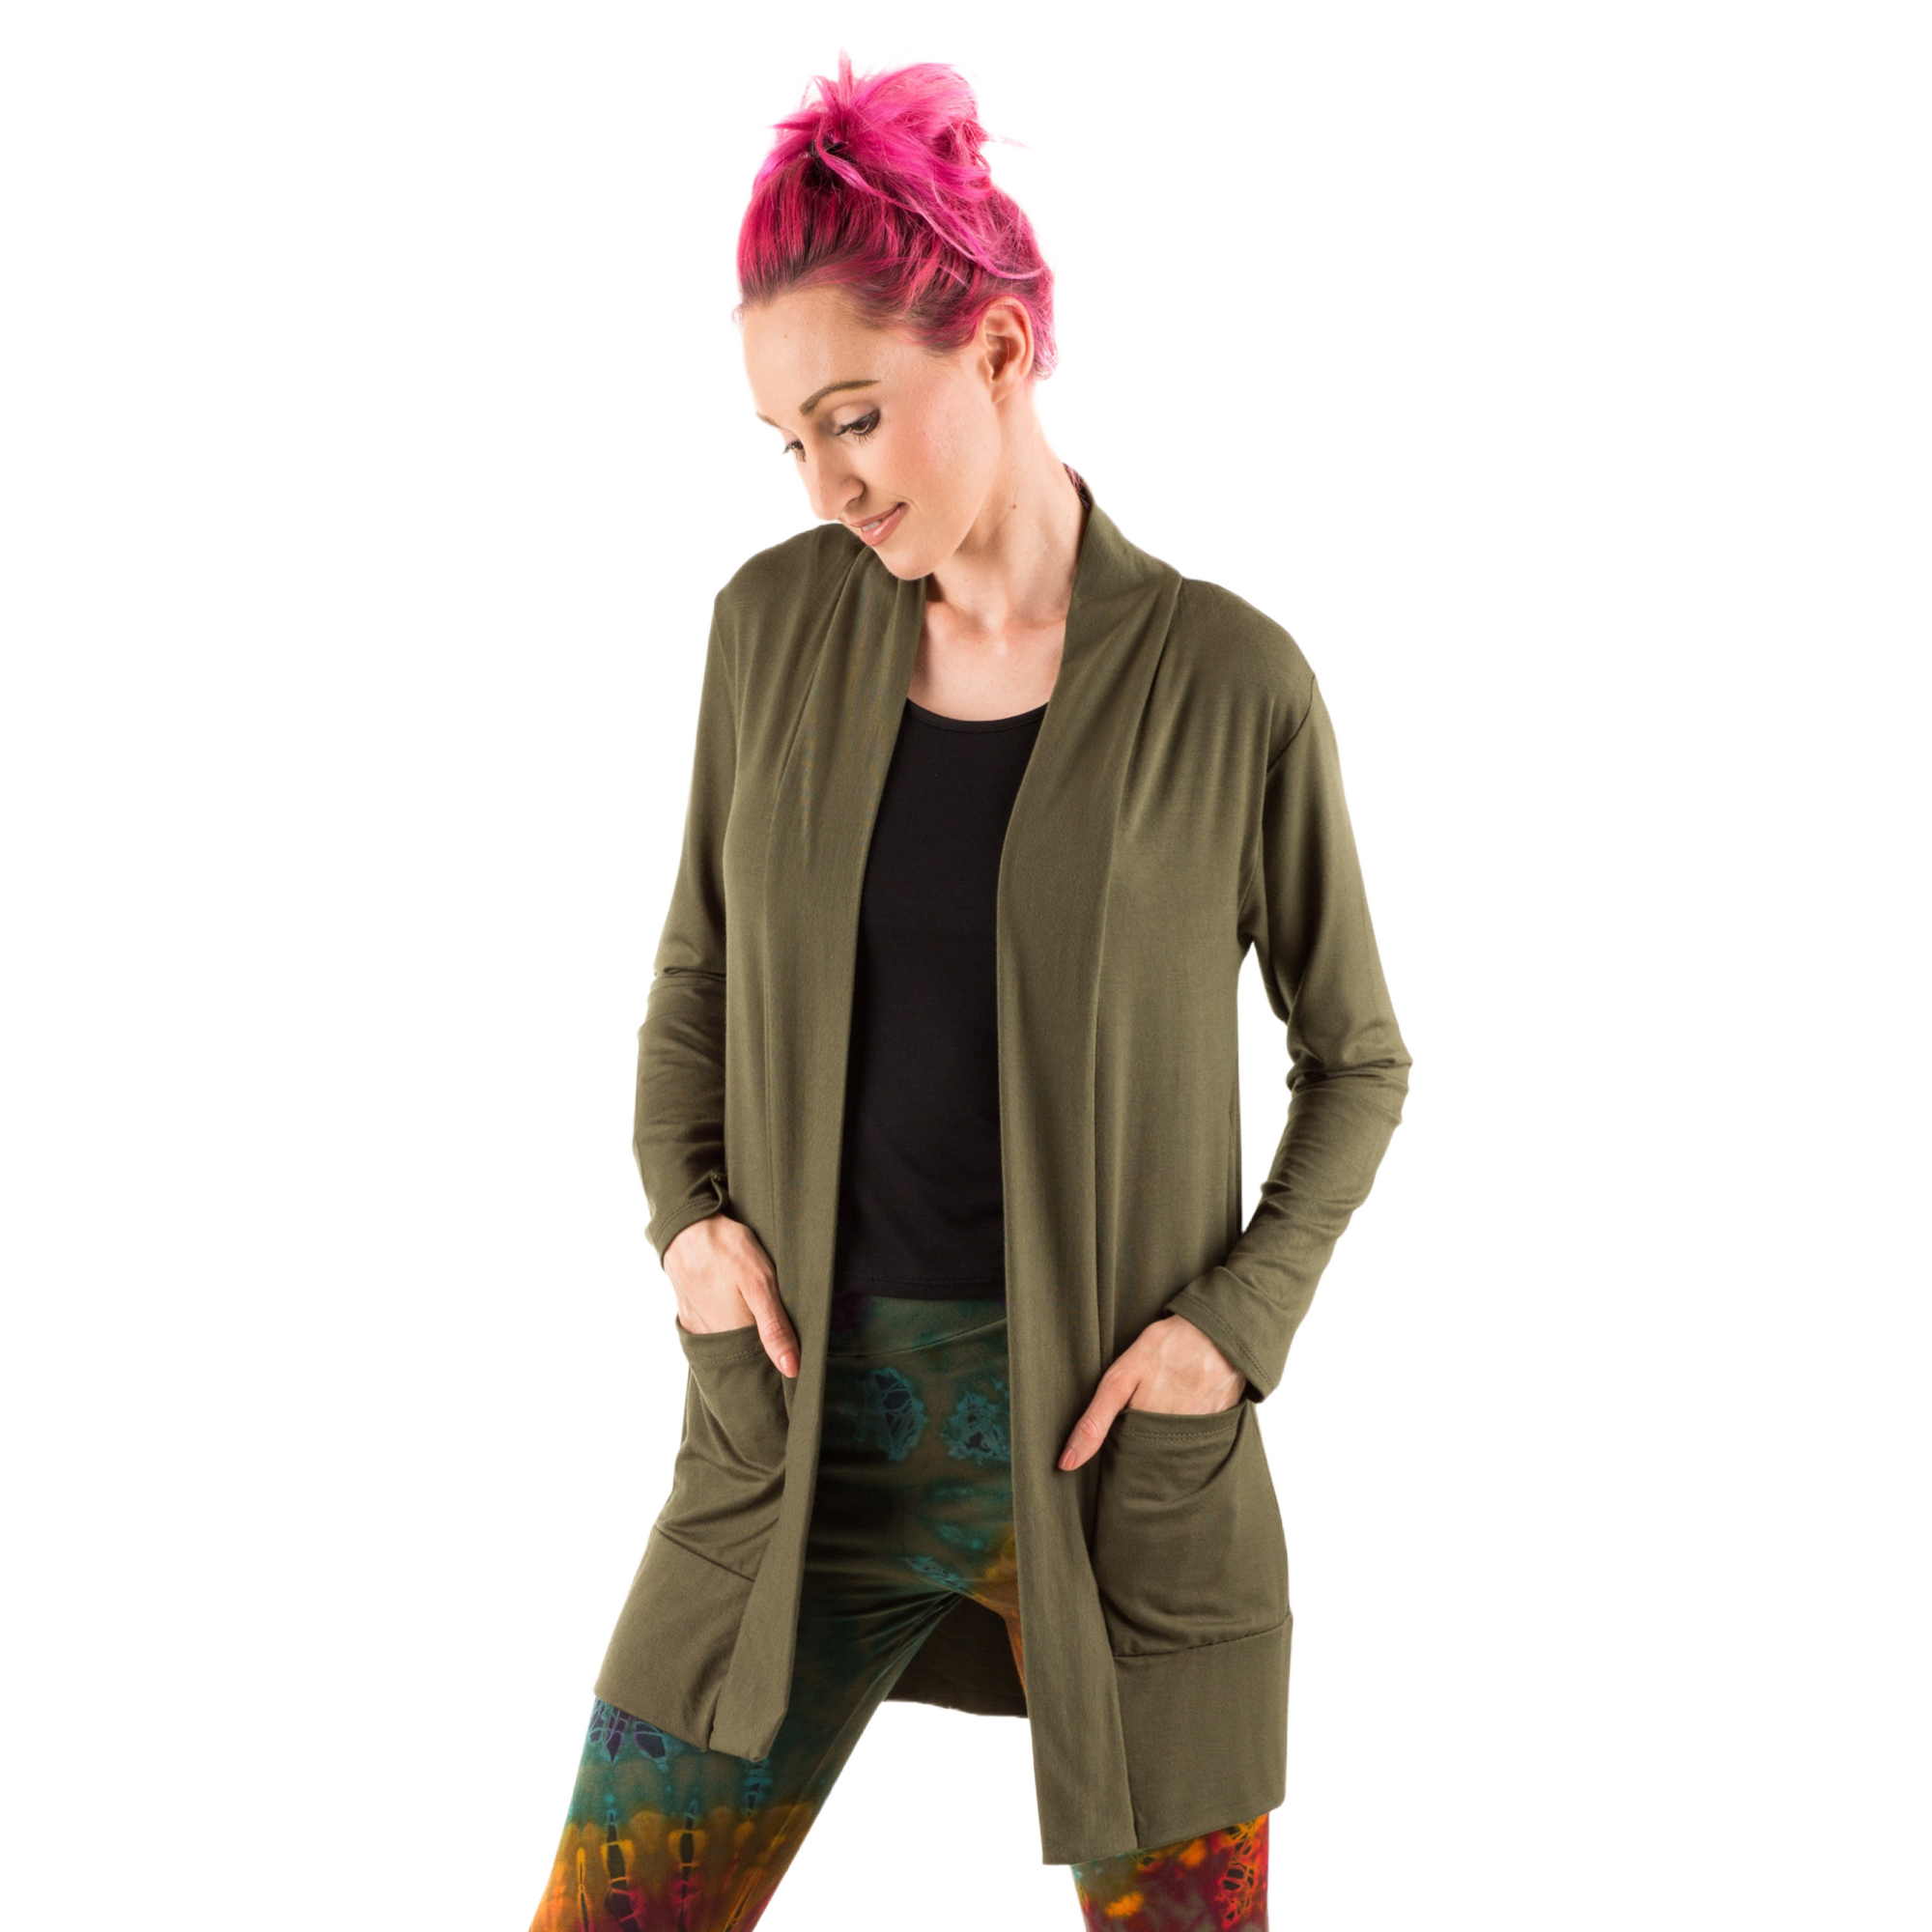 The Pocket Cardigan | Lightweight Open Front Stretchy Rayon Cardigan